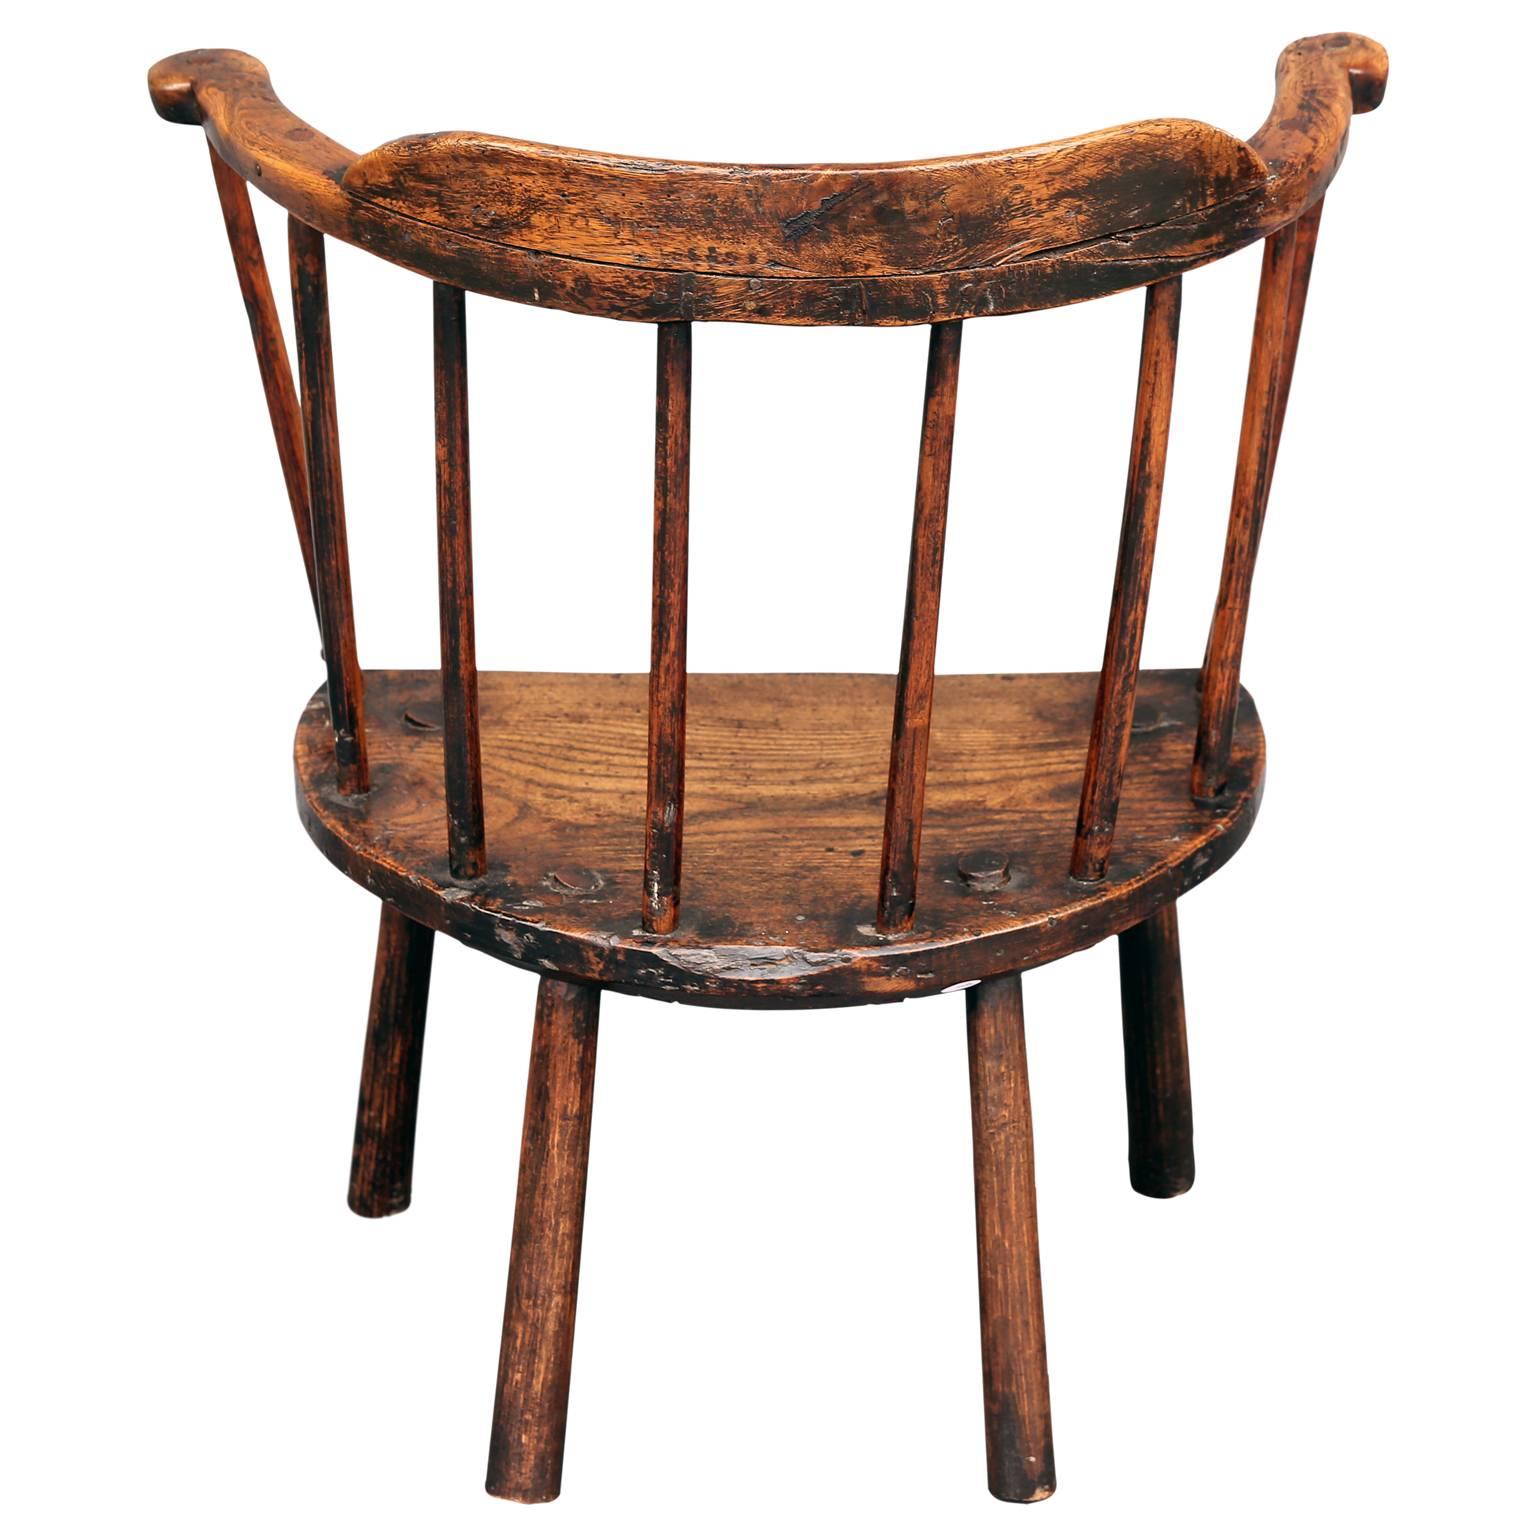 Folk Art 18th Century Stick Chair from Wales